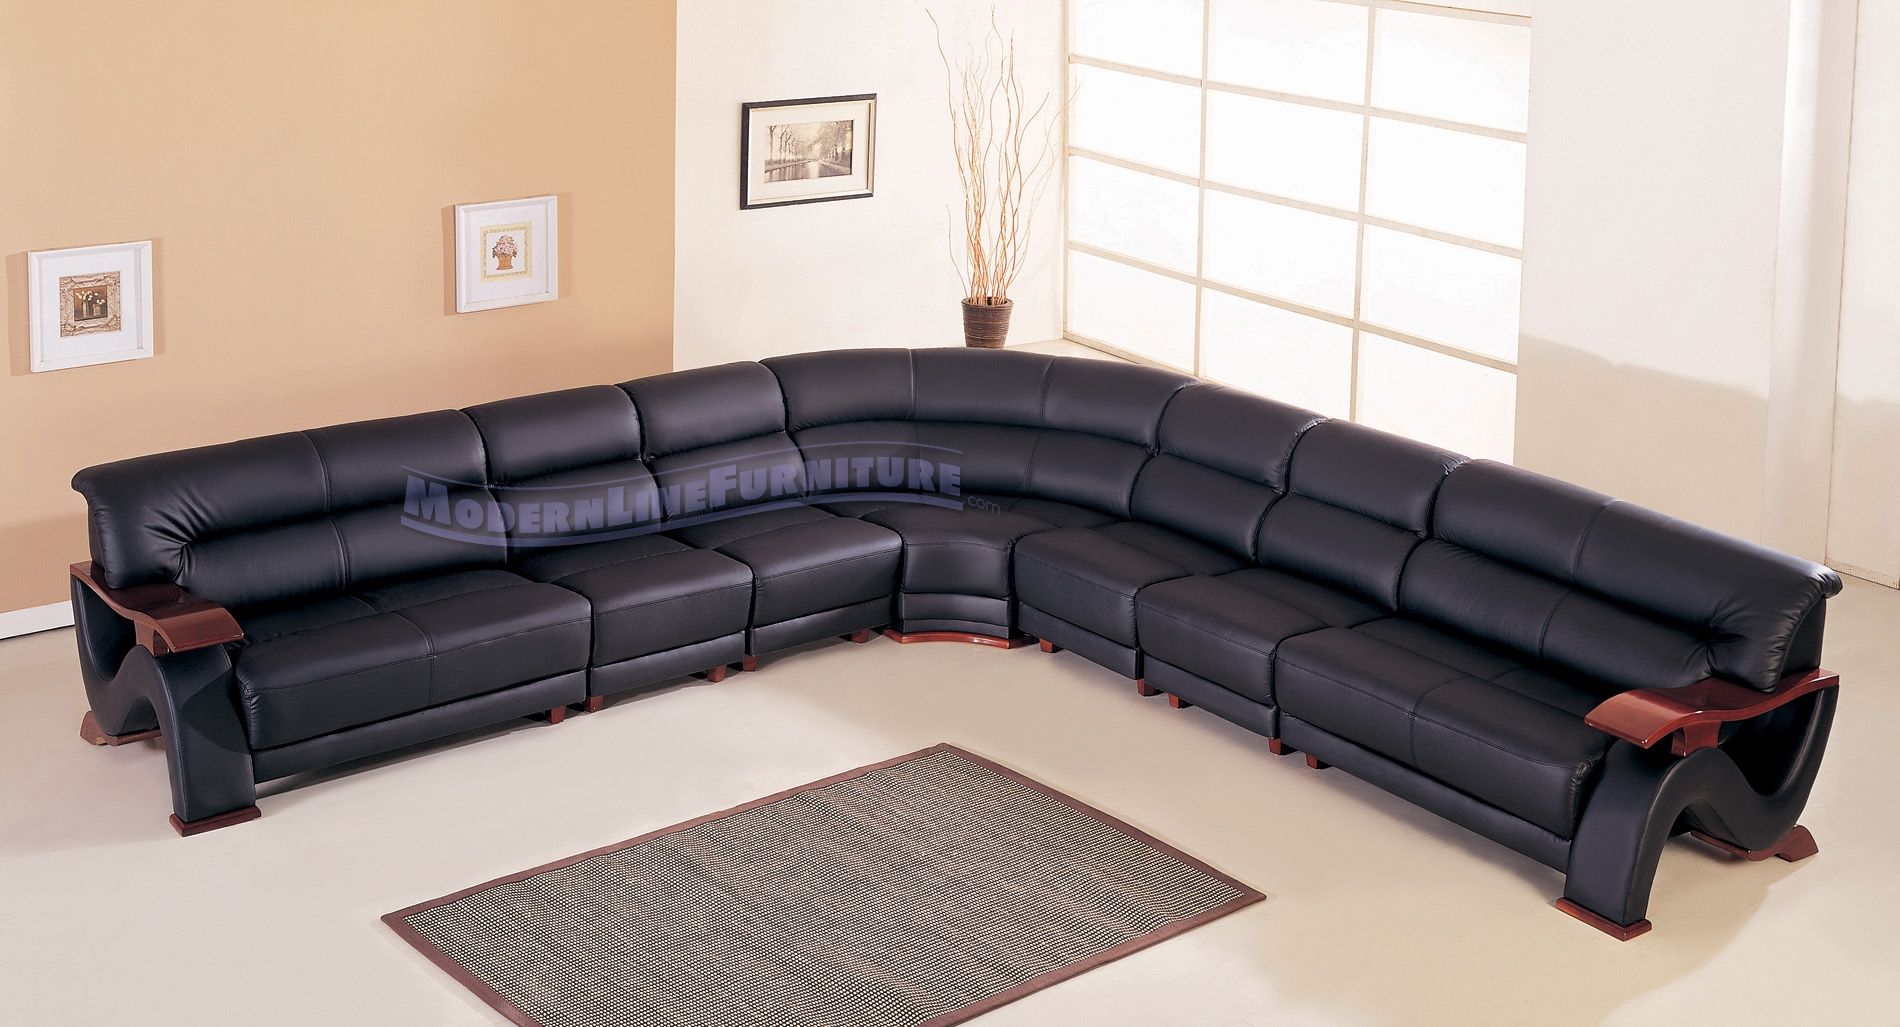 Modern Line Furniture Commercial Furniture Custom Made Intended For Custom Made Sectional Sofas 